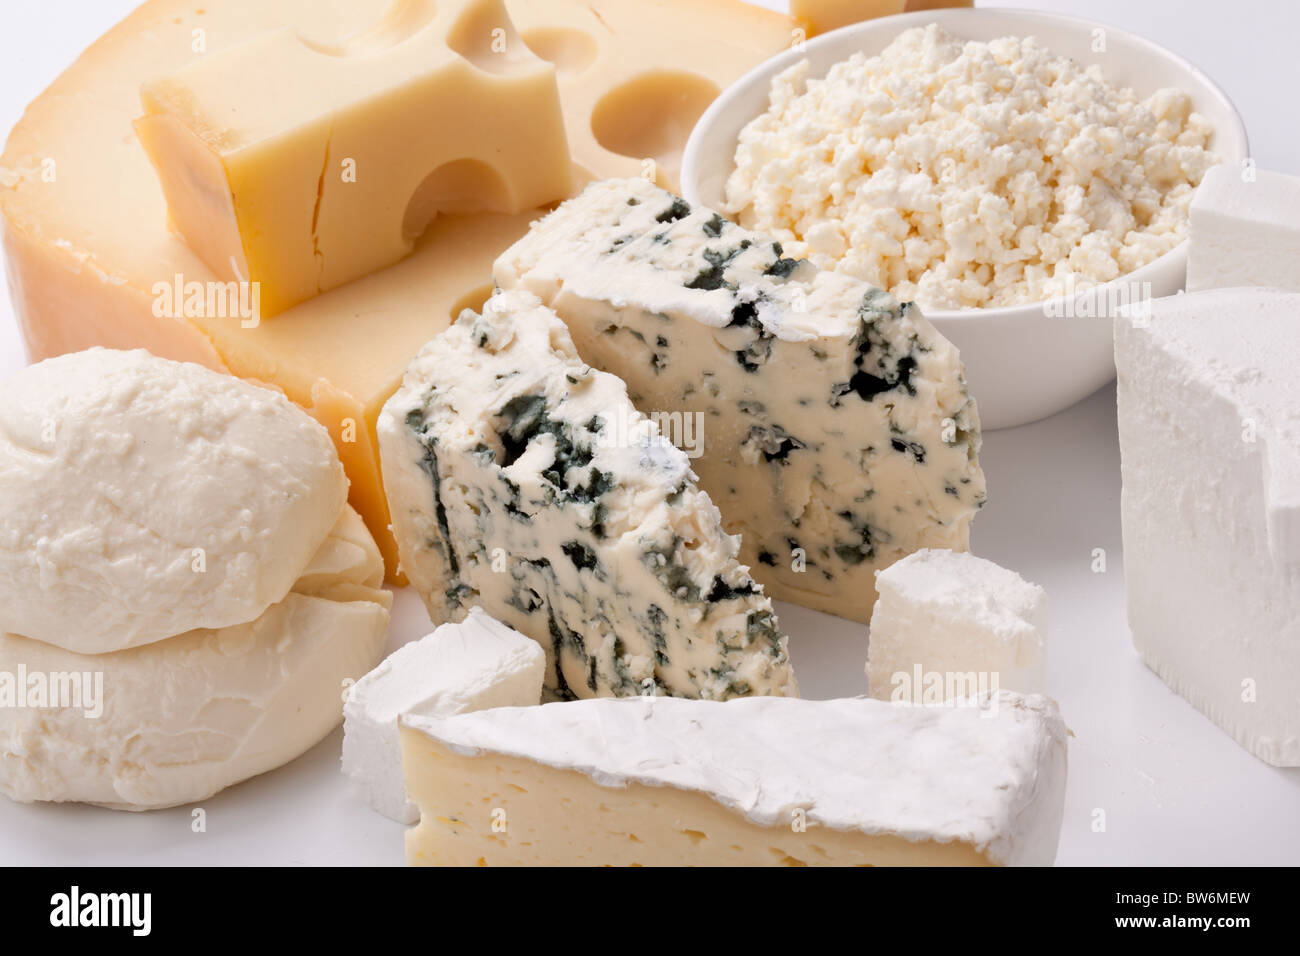 Various types of cheeses on a white background. Stock Photo